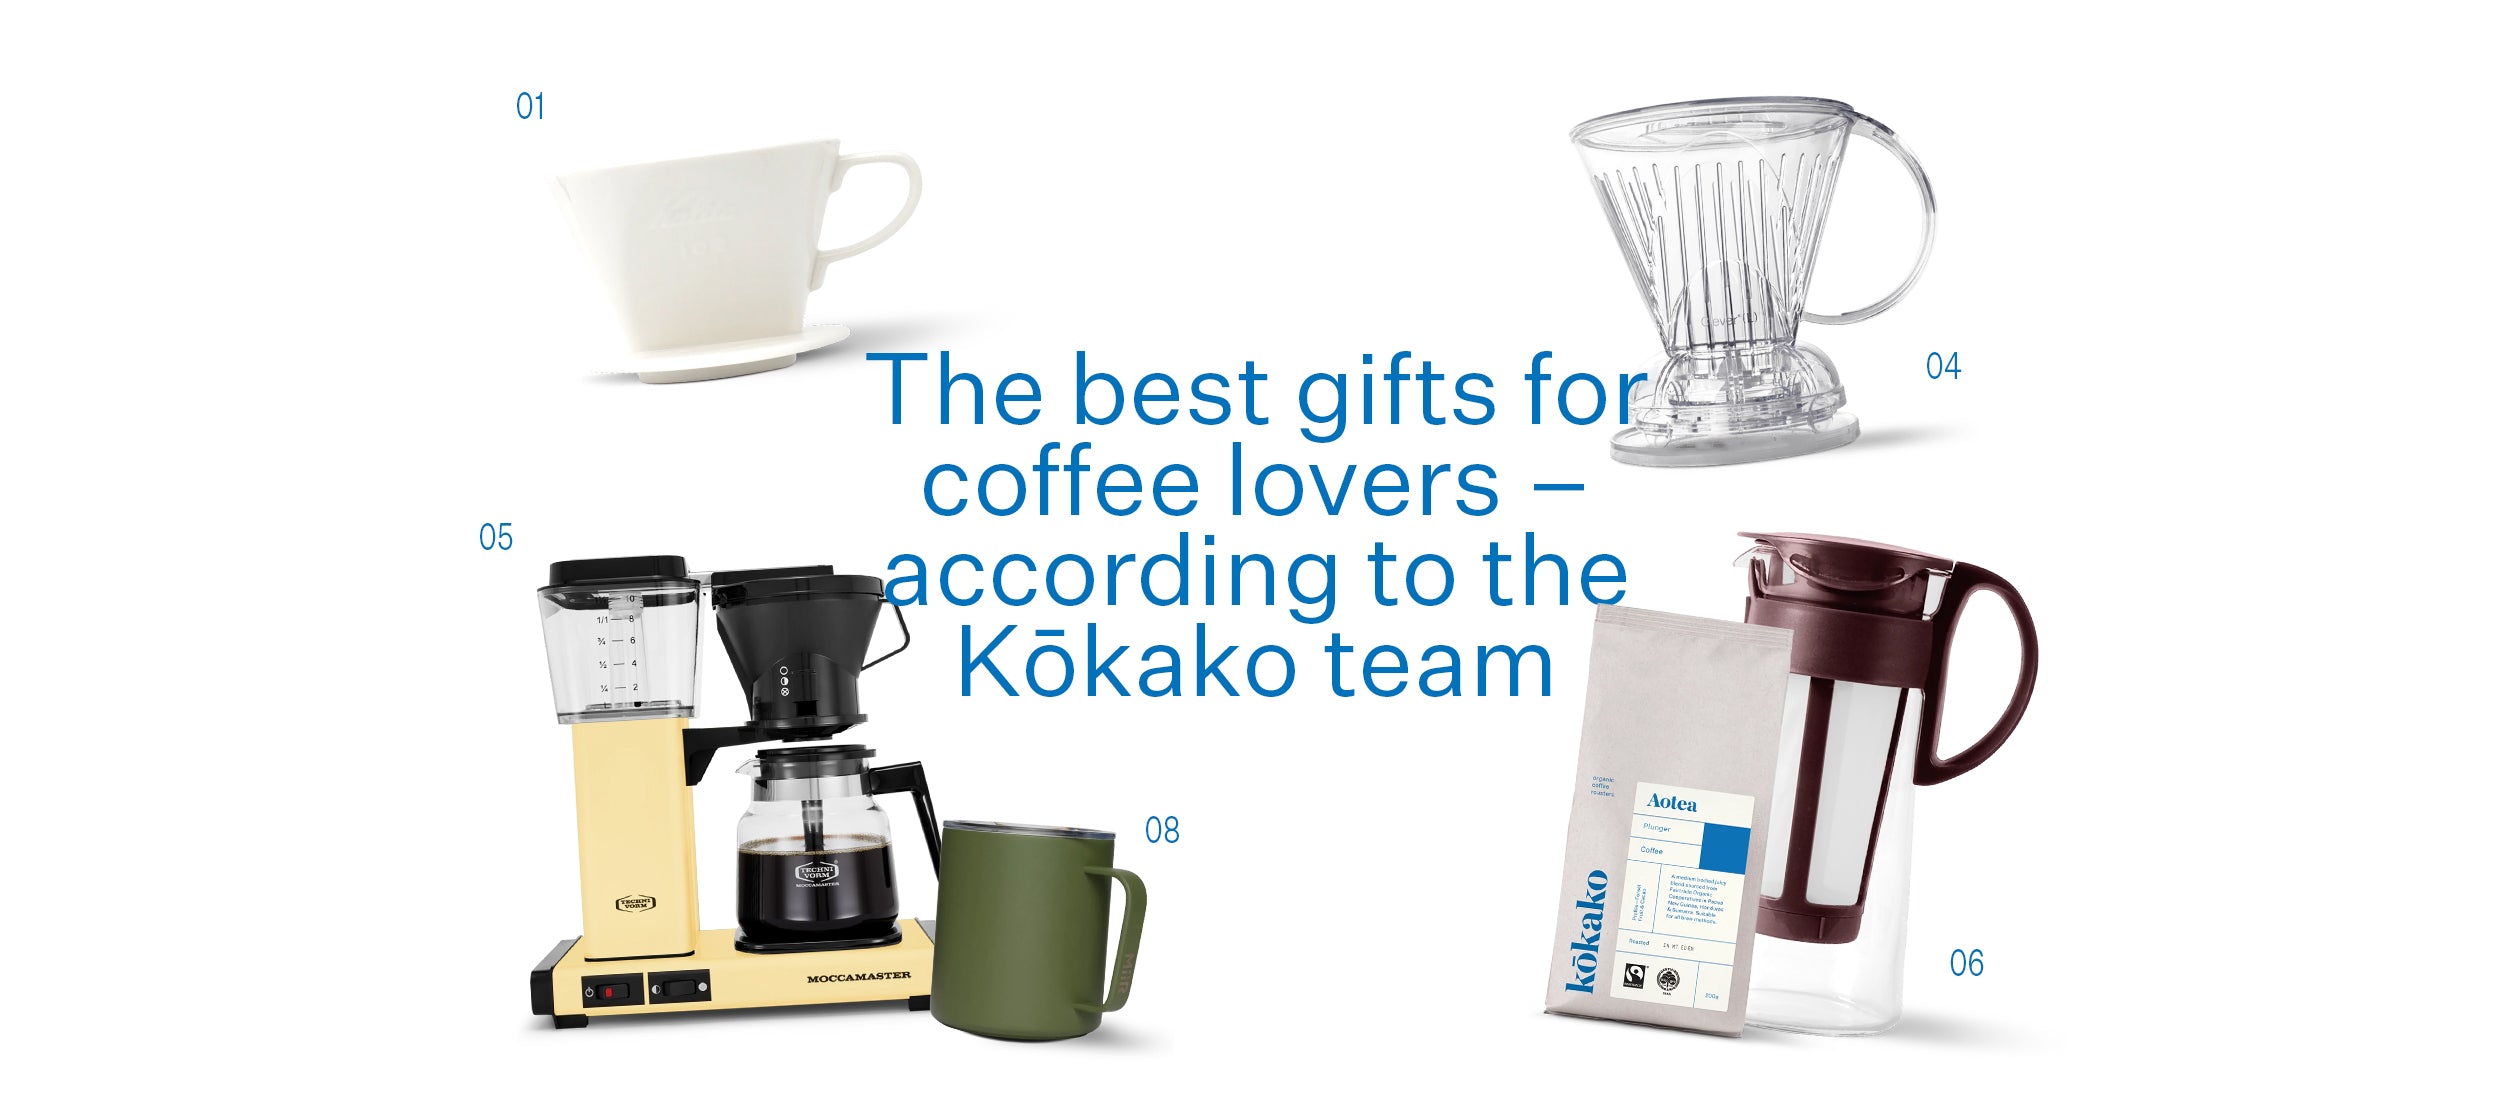 The best gifts for coffee lovers – according to the Kōkako team